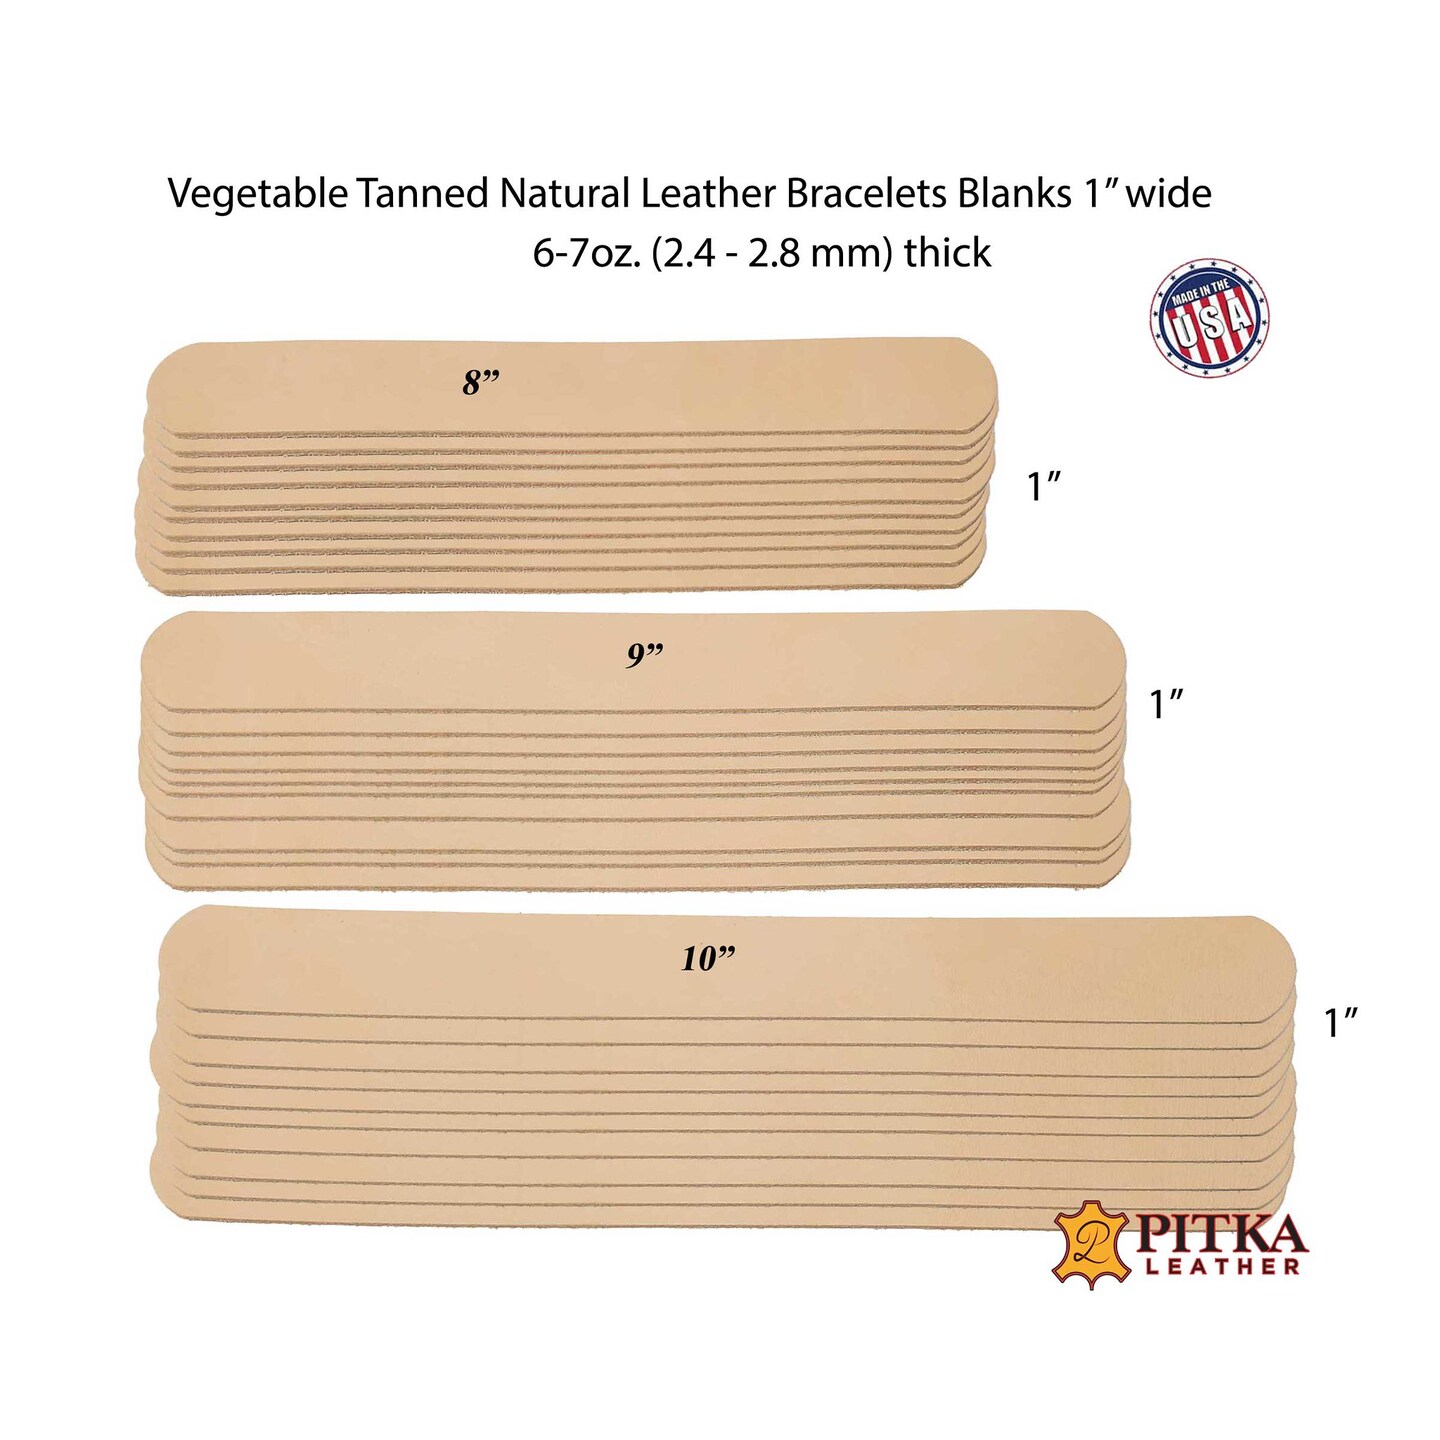 Natural Leather Blanks 1 Inch wide 10 Packs- Vegetable Tanned Leather Craft Blanks for DIY Projects